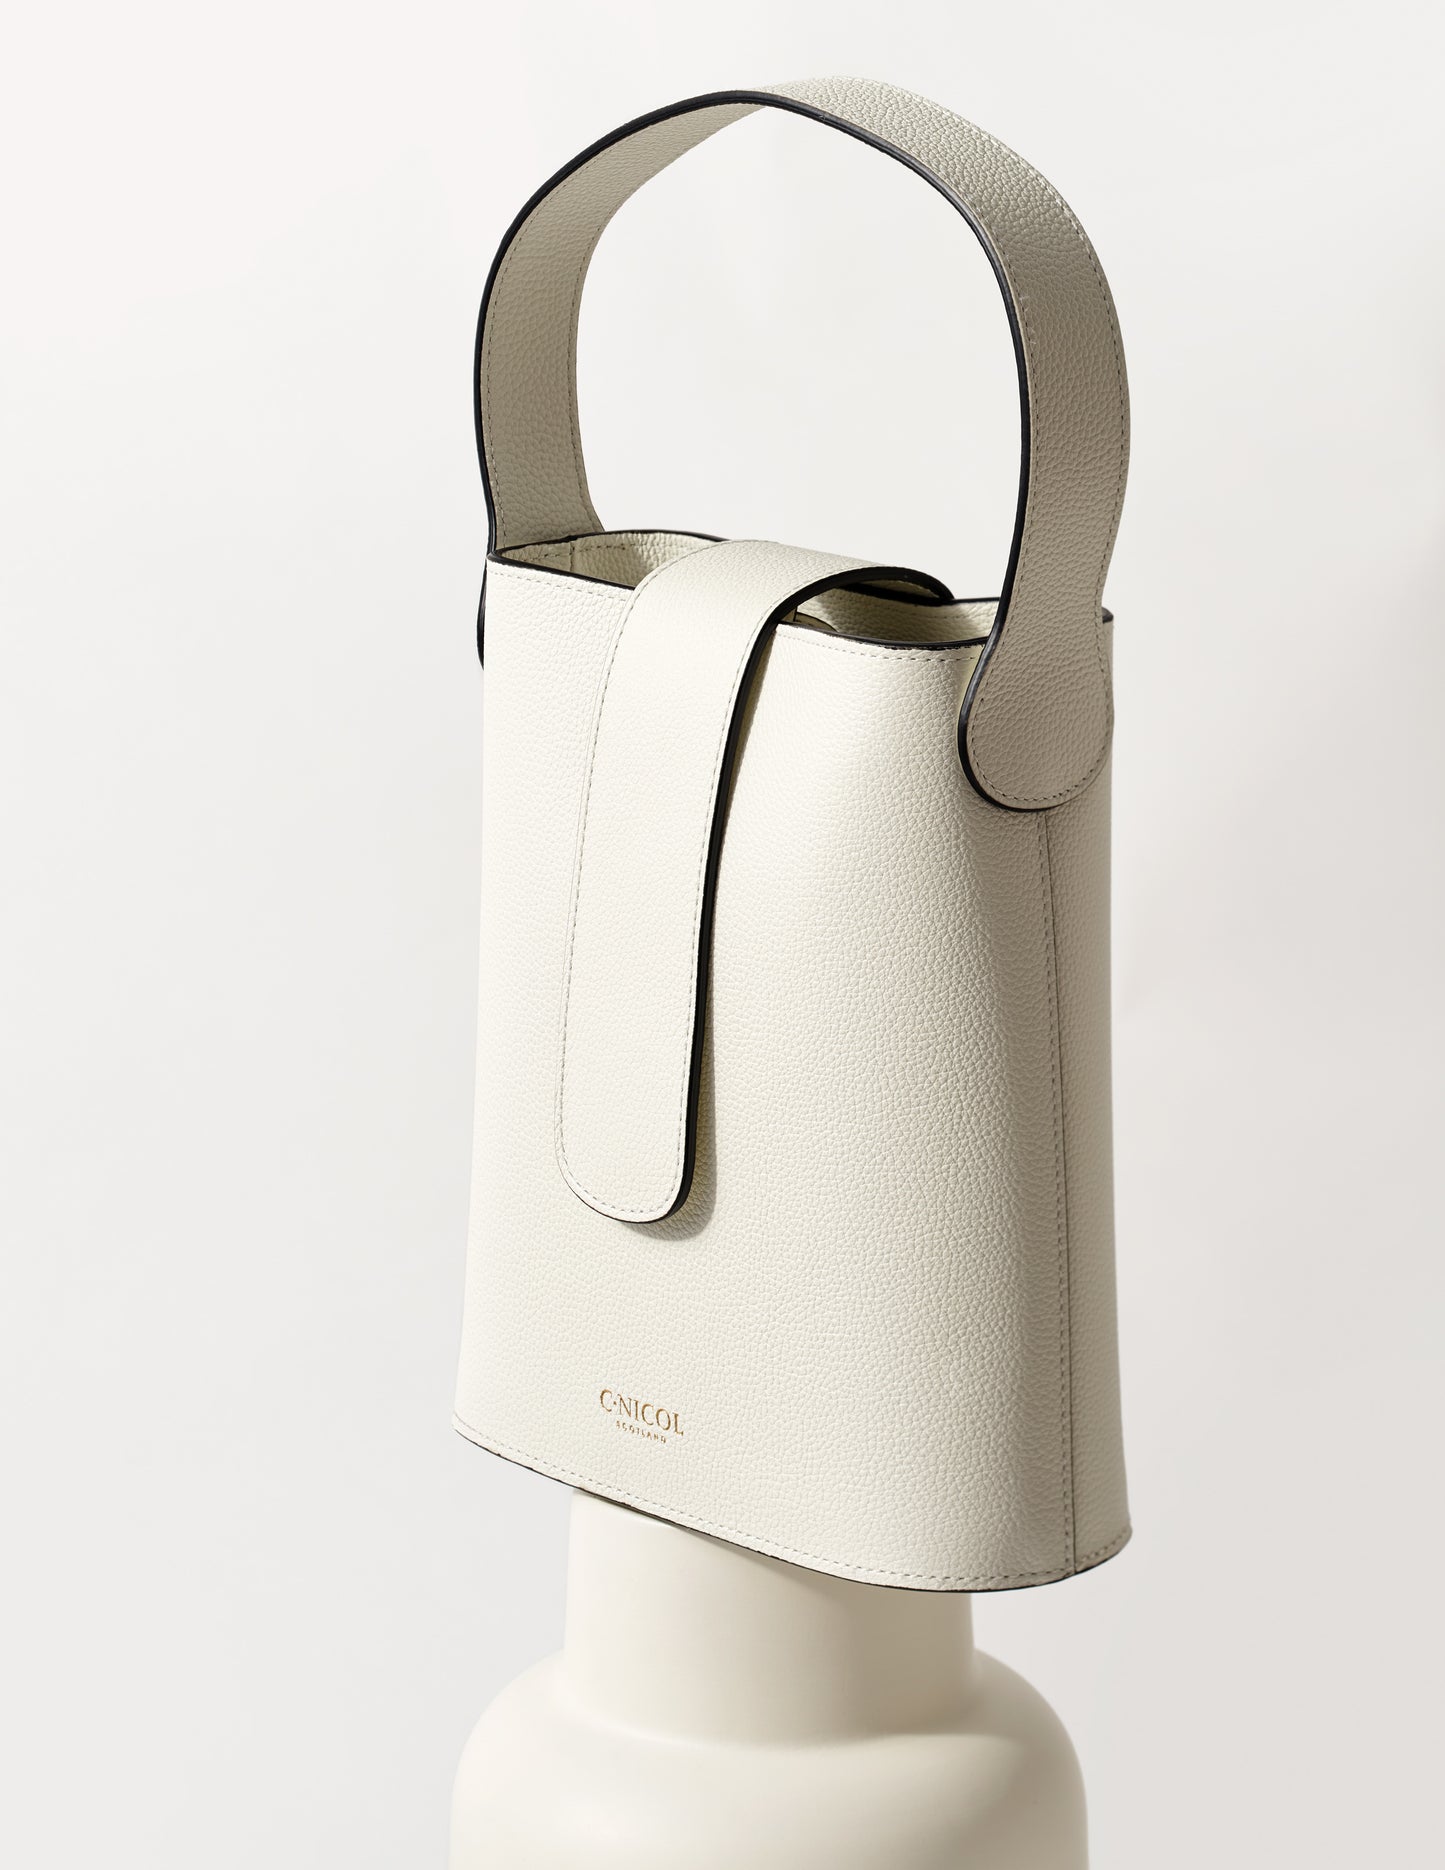 CNicol White Leather Holly Bag on White Base